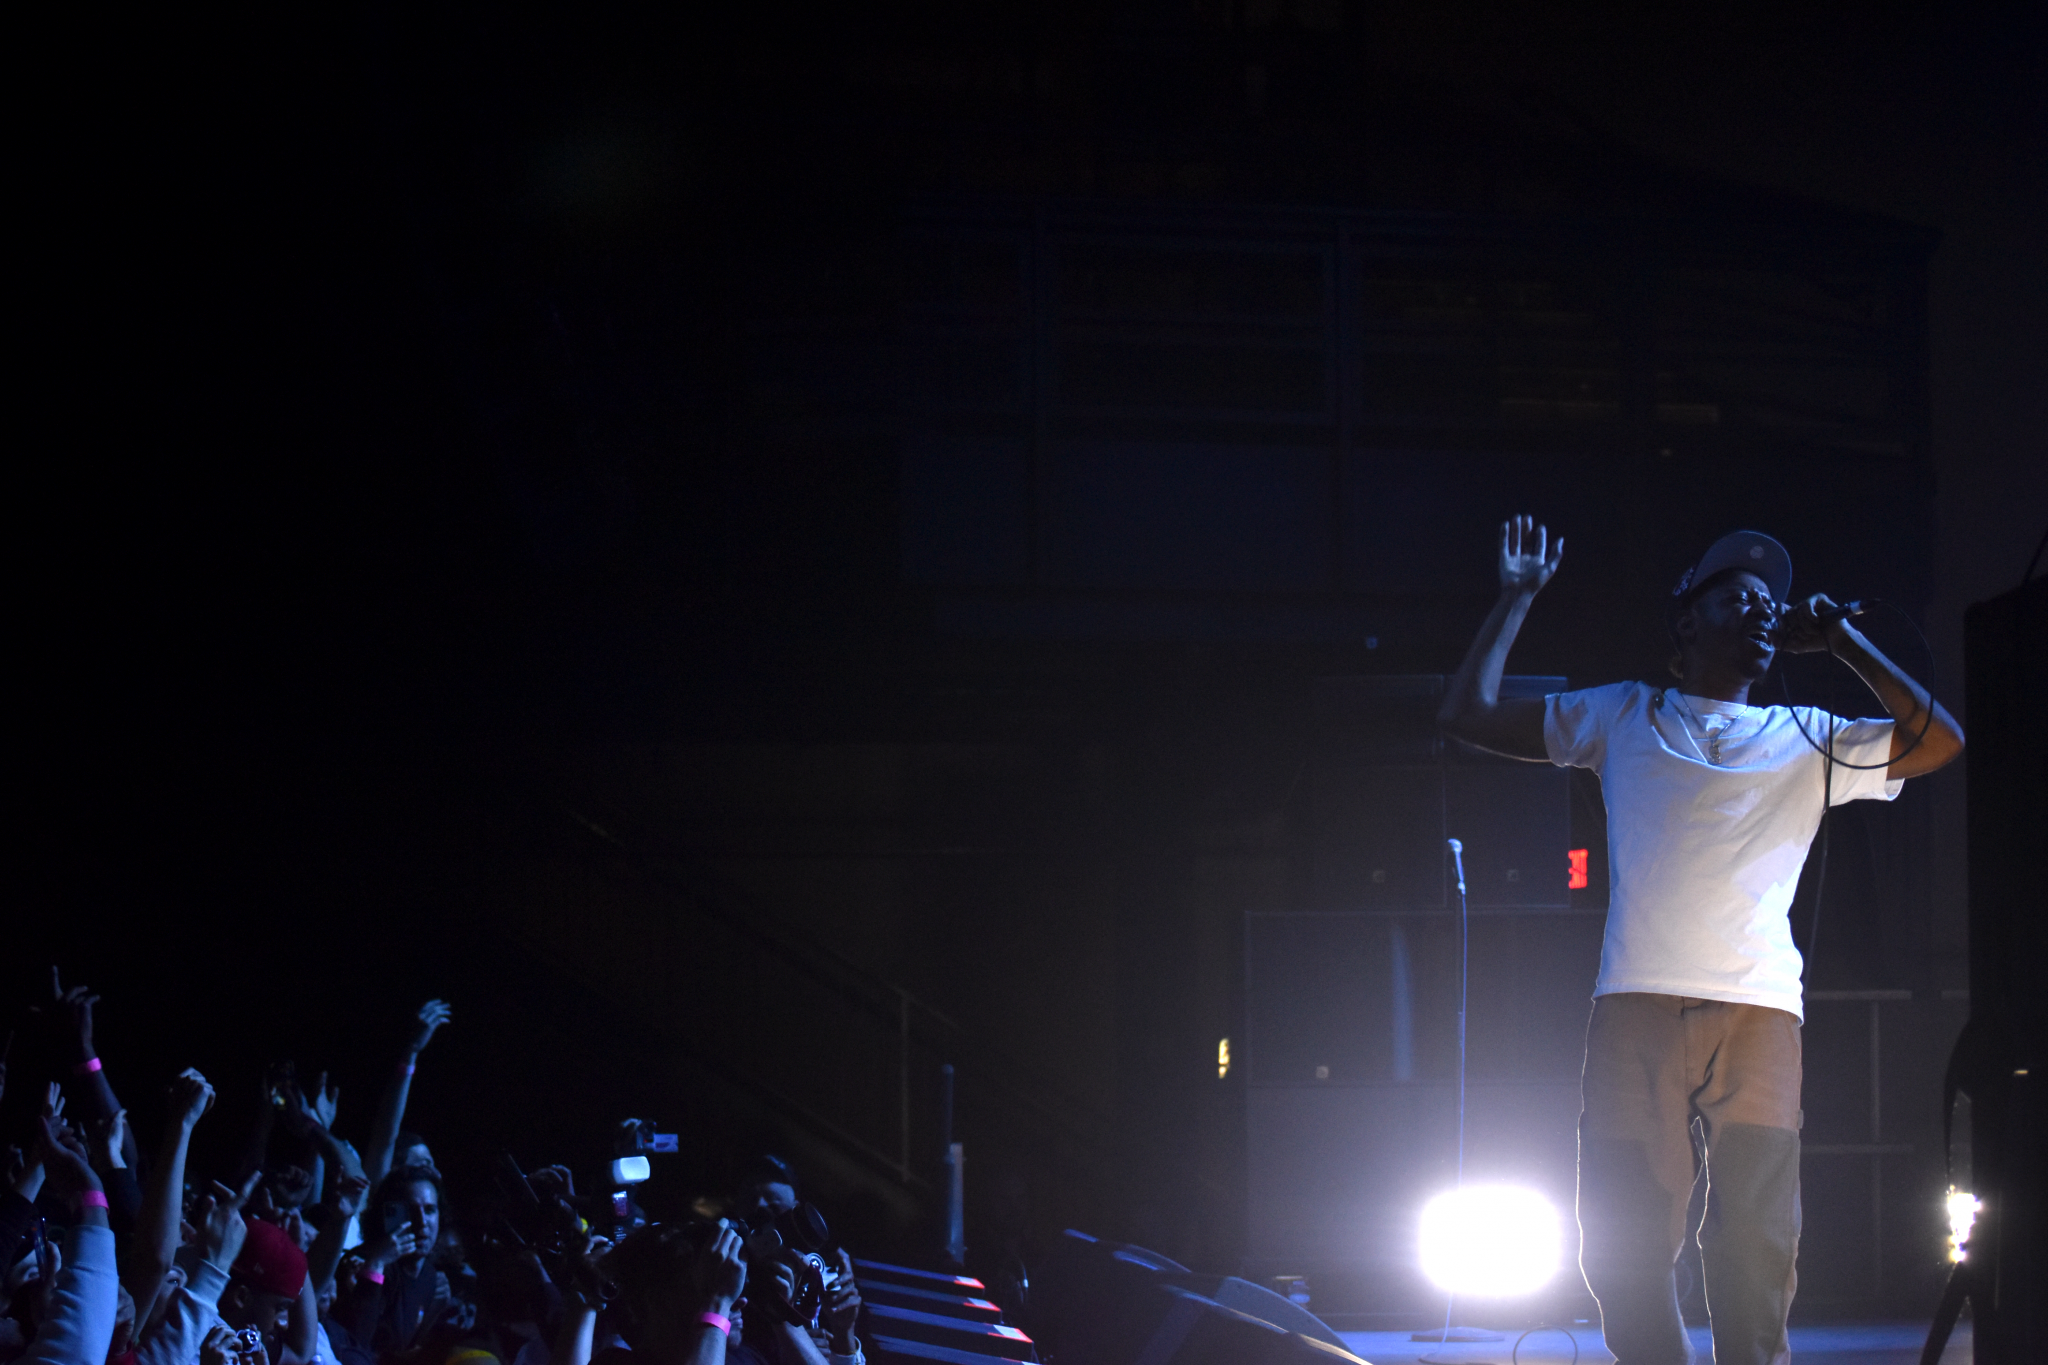 A moment of spotlight serenity for Cousin Stizz at the Roadrunner, April 22, 2022 (photo credit: Brandon Hill).